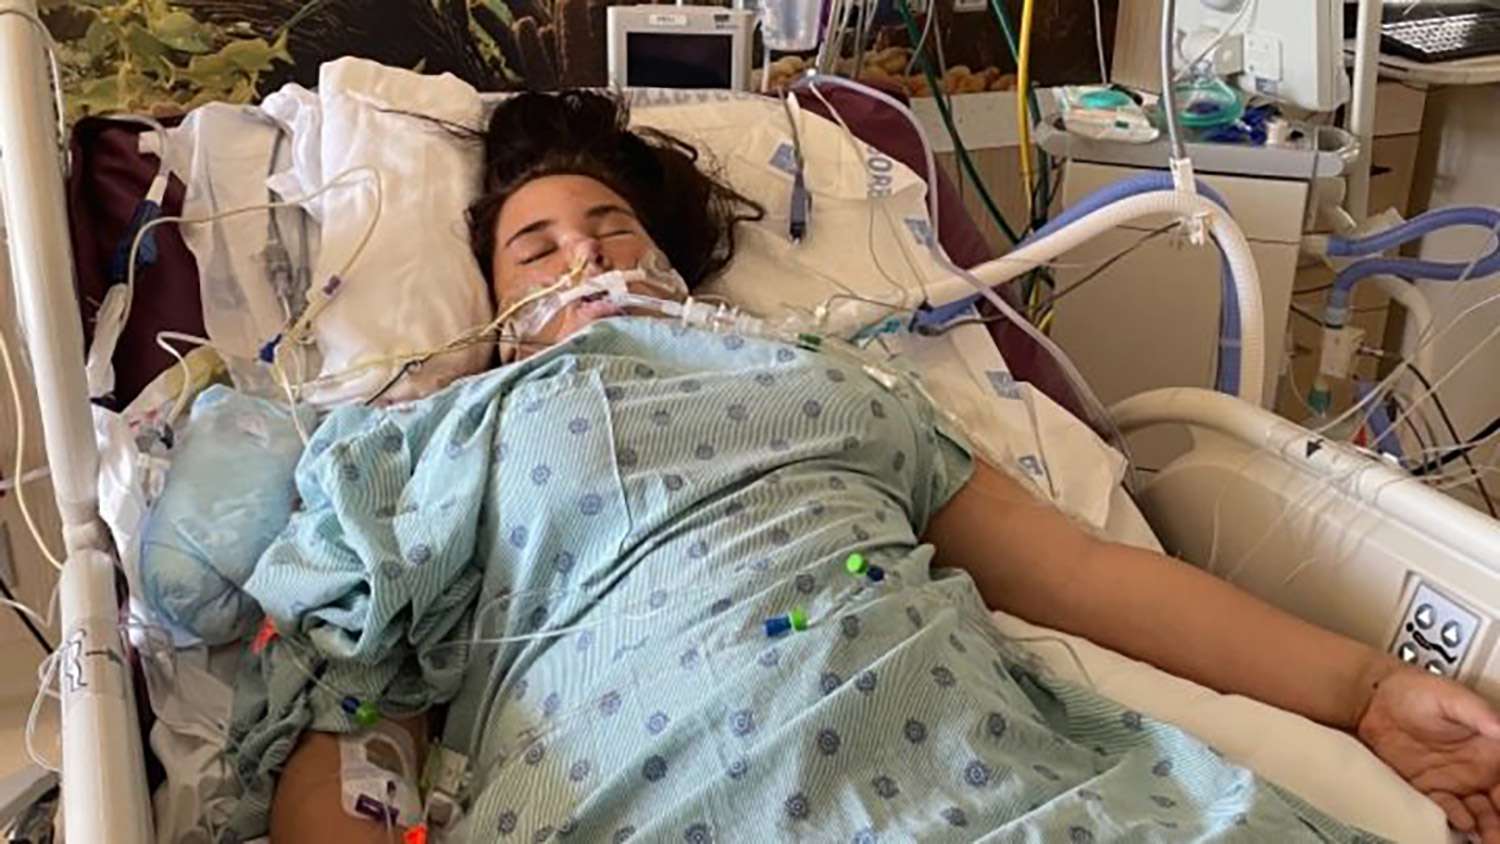 Mom Lives in Daughter's ICU Hospital Room as Teen Battles COVID: 'I'm Not Going Anywhere' - Yahoo Entertainment